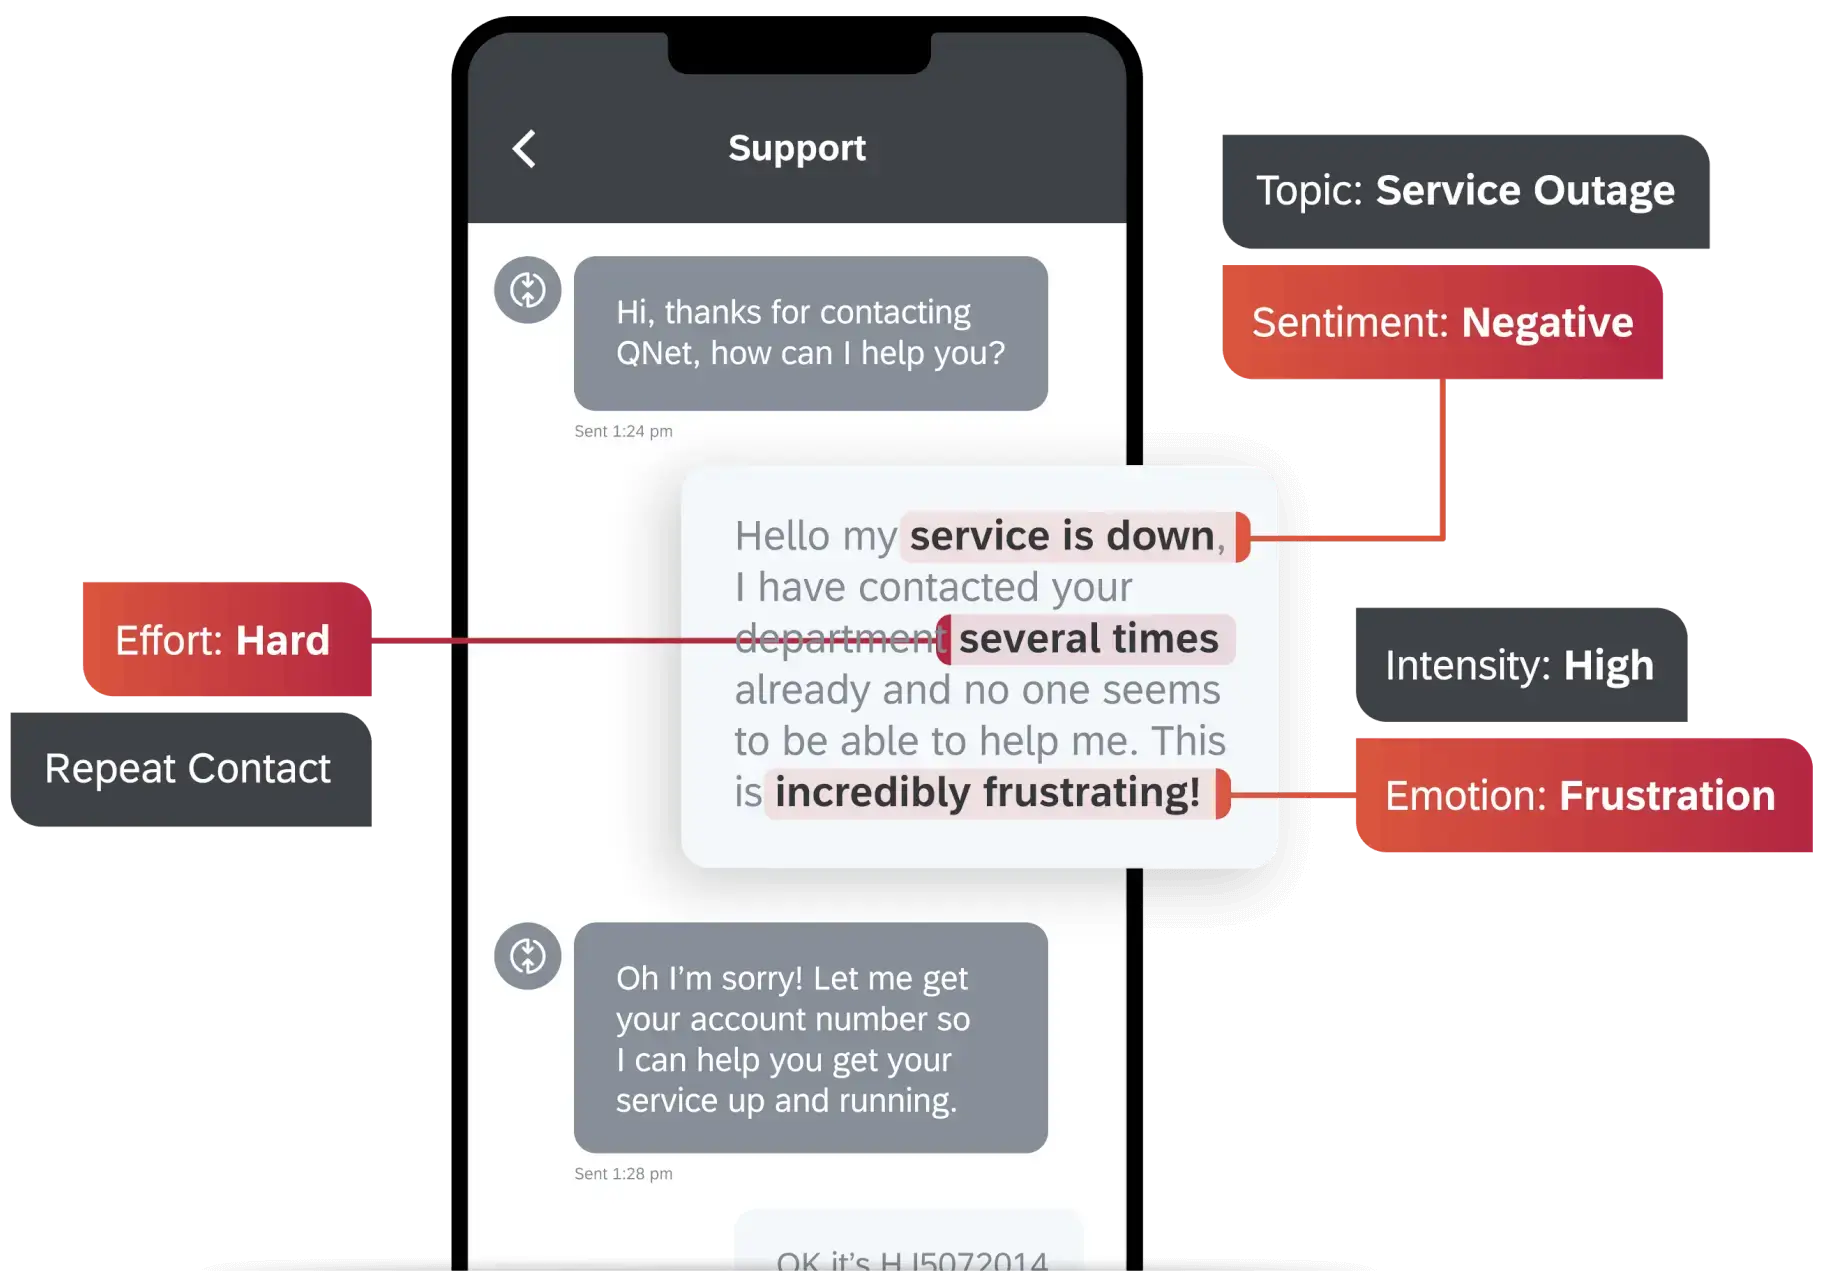 Support chat conversation with real-time sentiment analysis